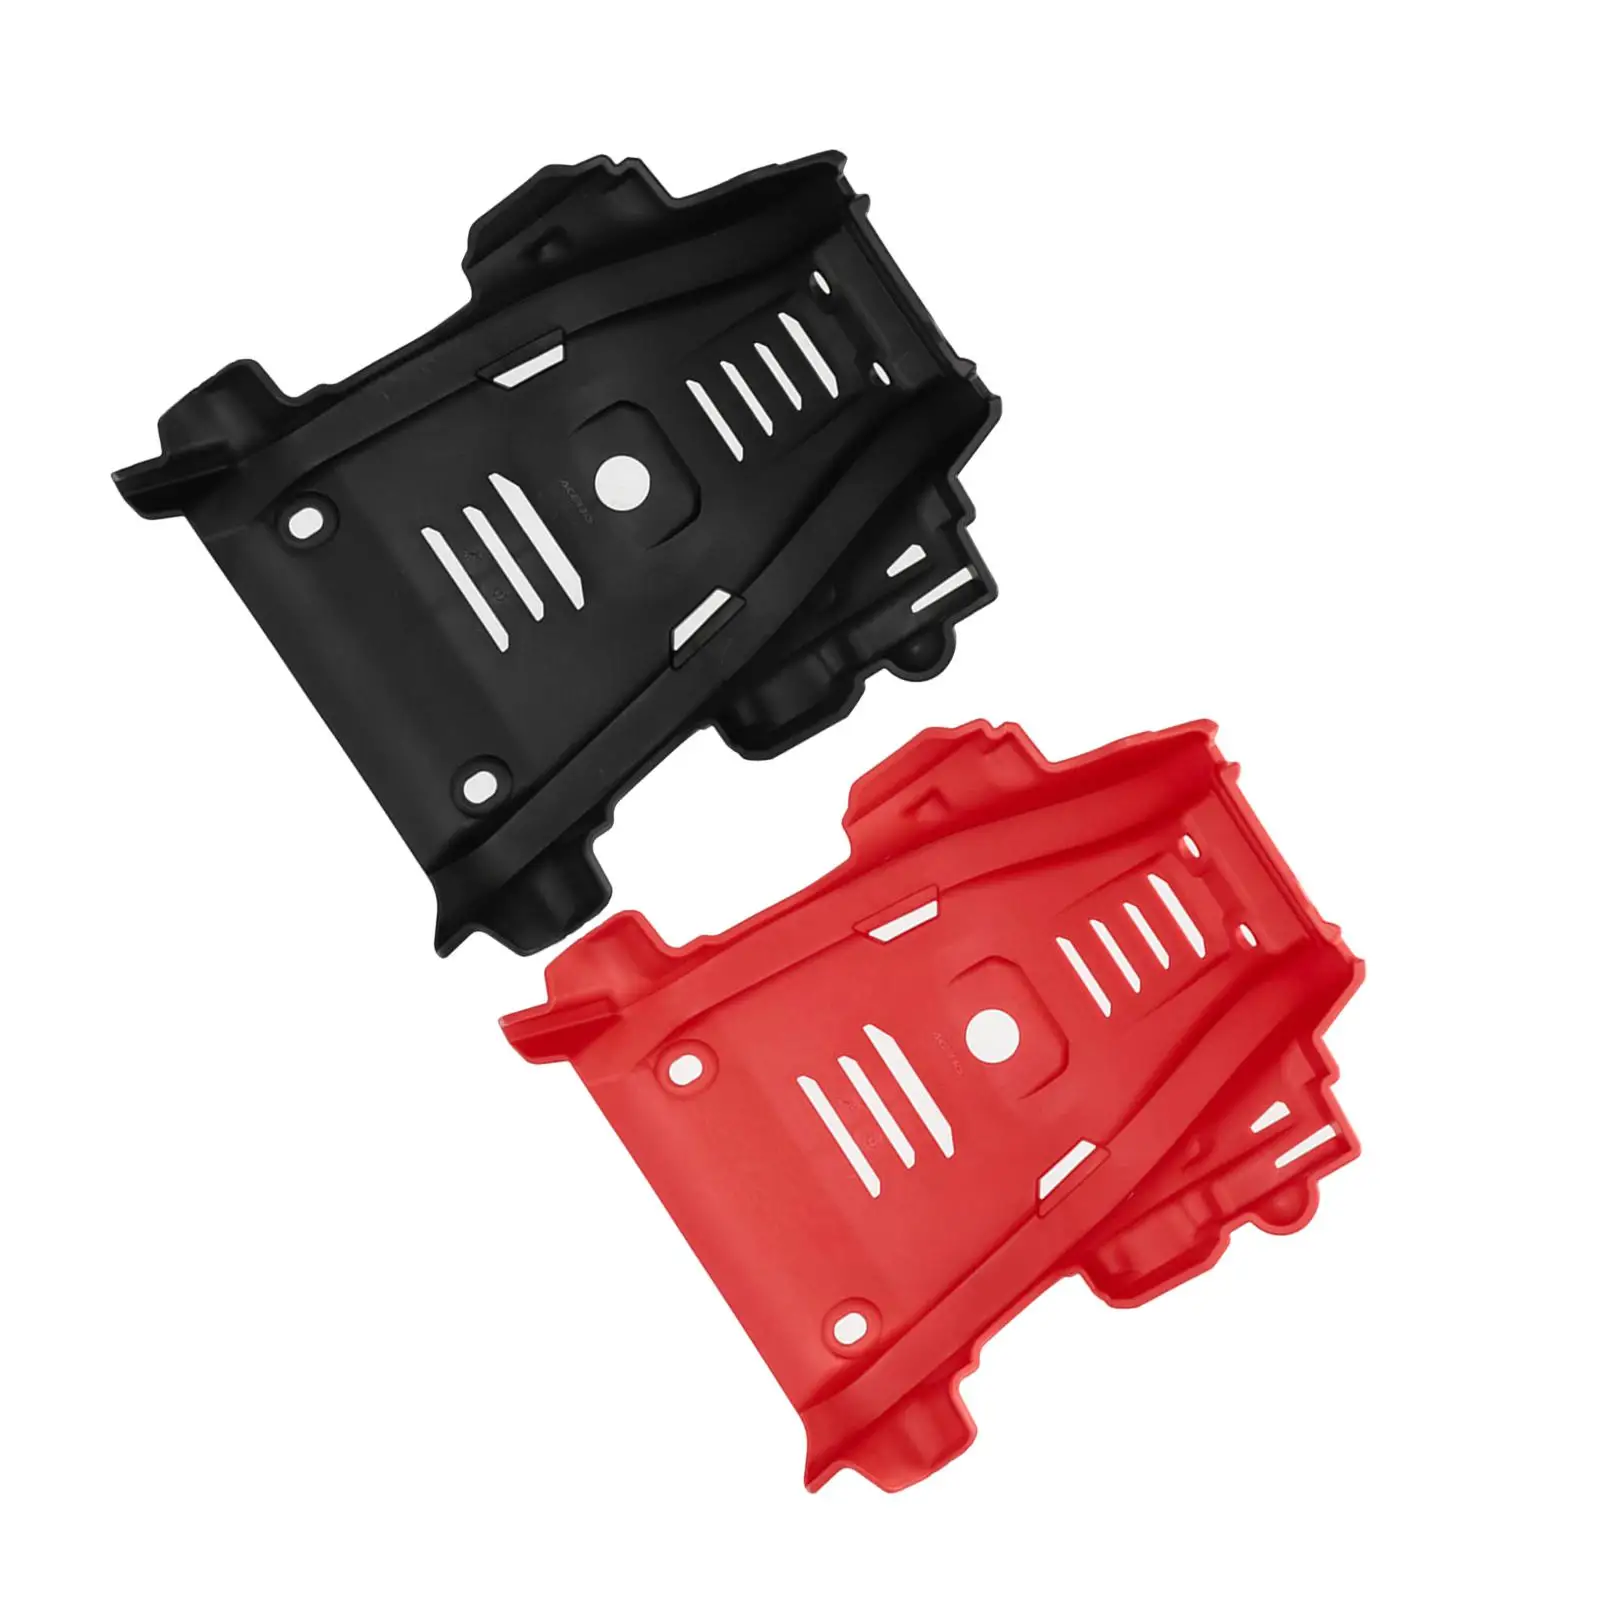 Engine Base Chassis Guard Plate Protector Cover for Crf300L Professional Durable